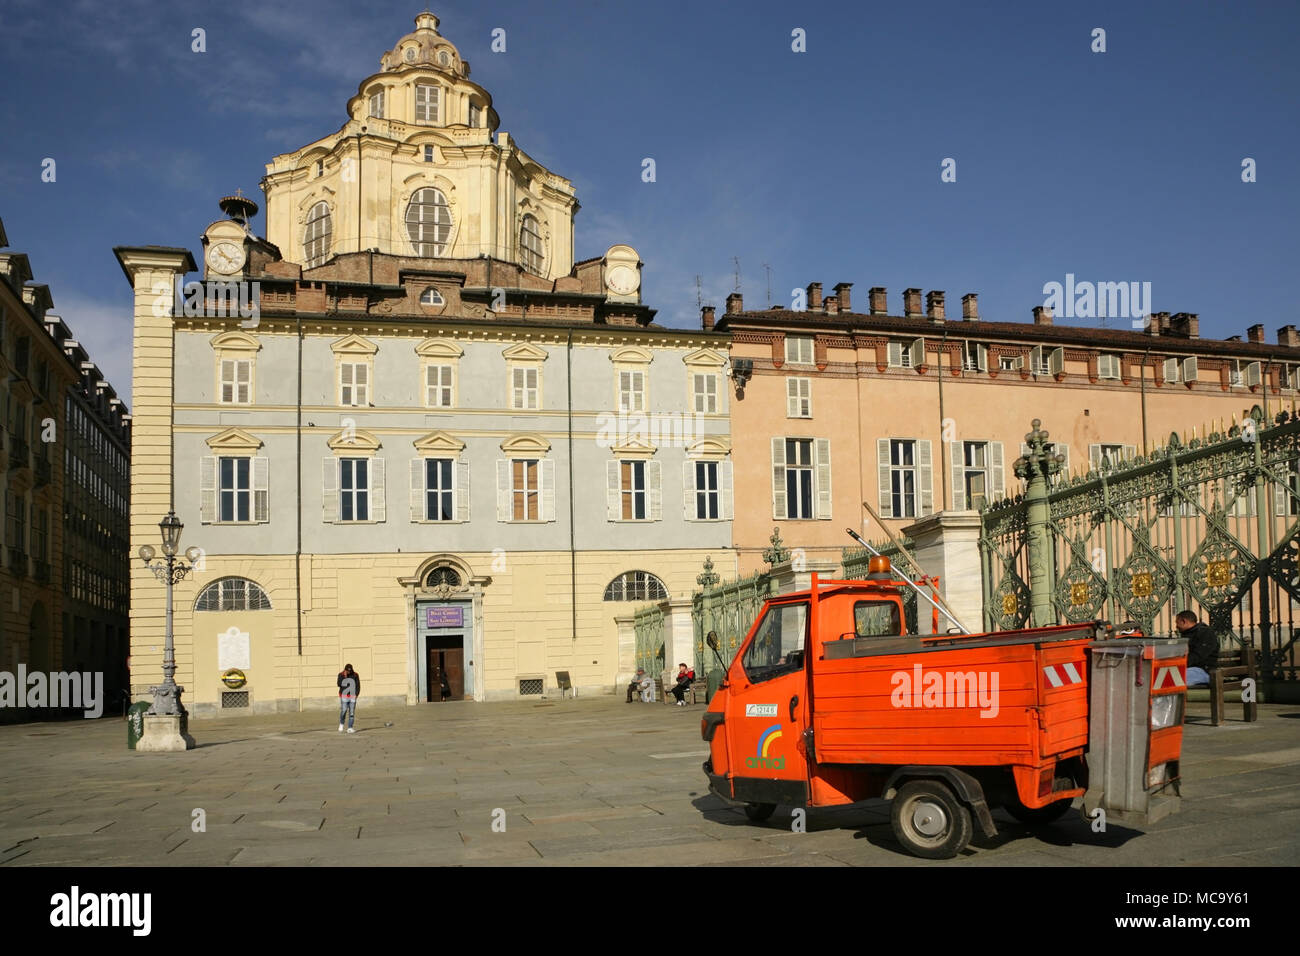 Rubbish collector's Piaggio Ape 50 in front of the dome and tower of the 17th century Royal Church of San Lorenzo, Piazza Castello, Turin, Stock Photo